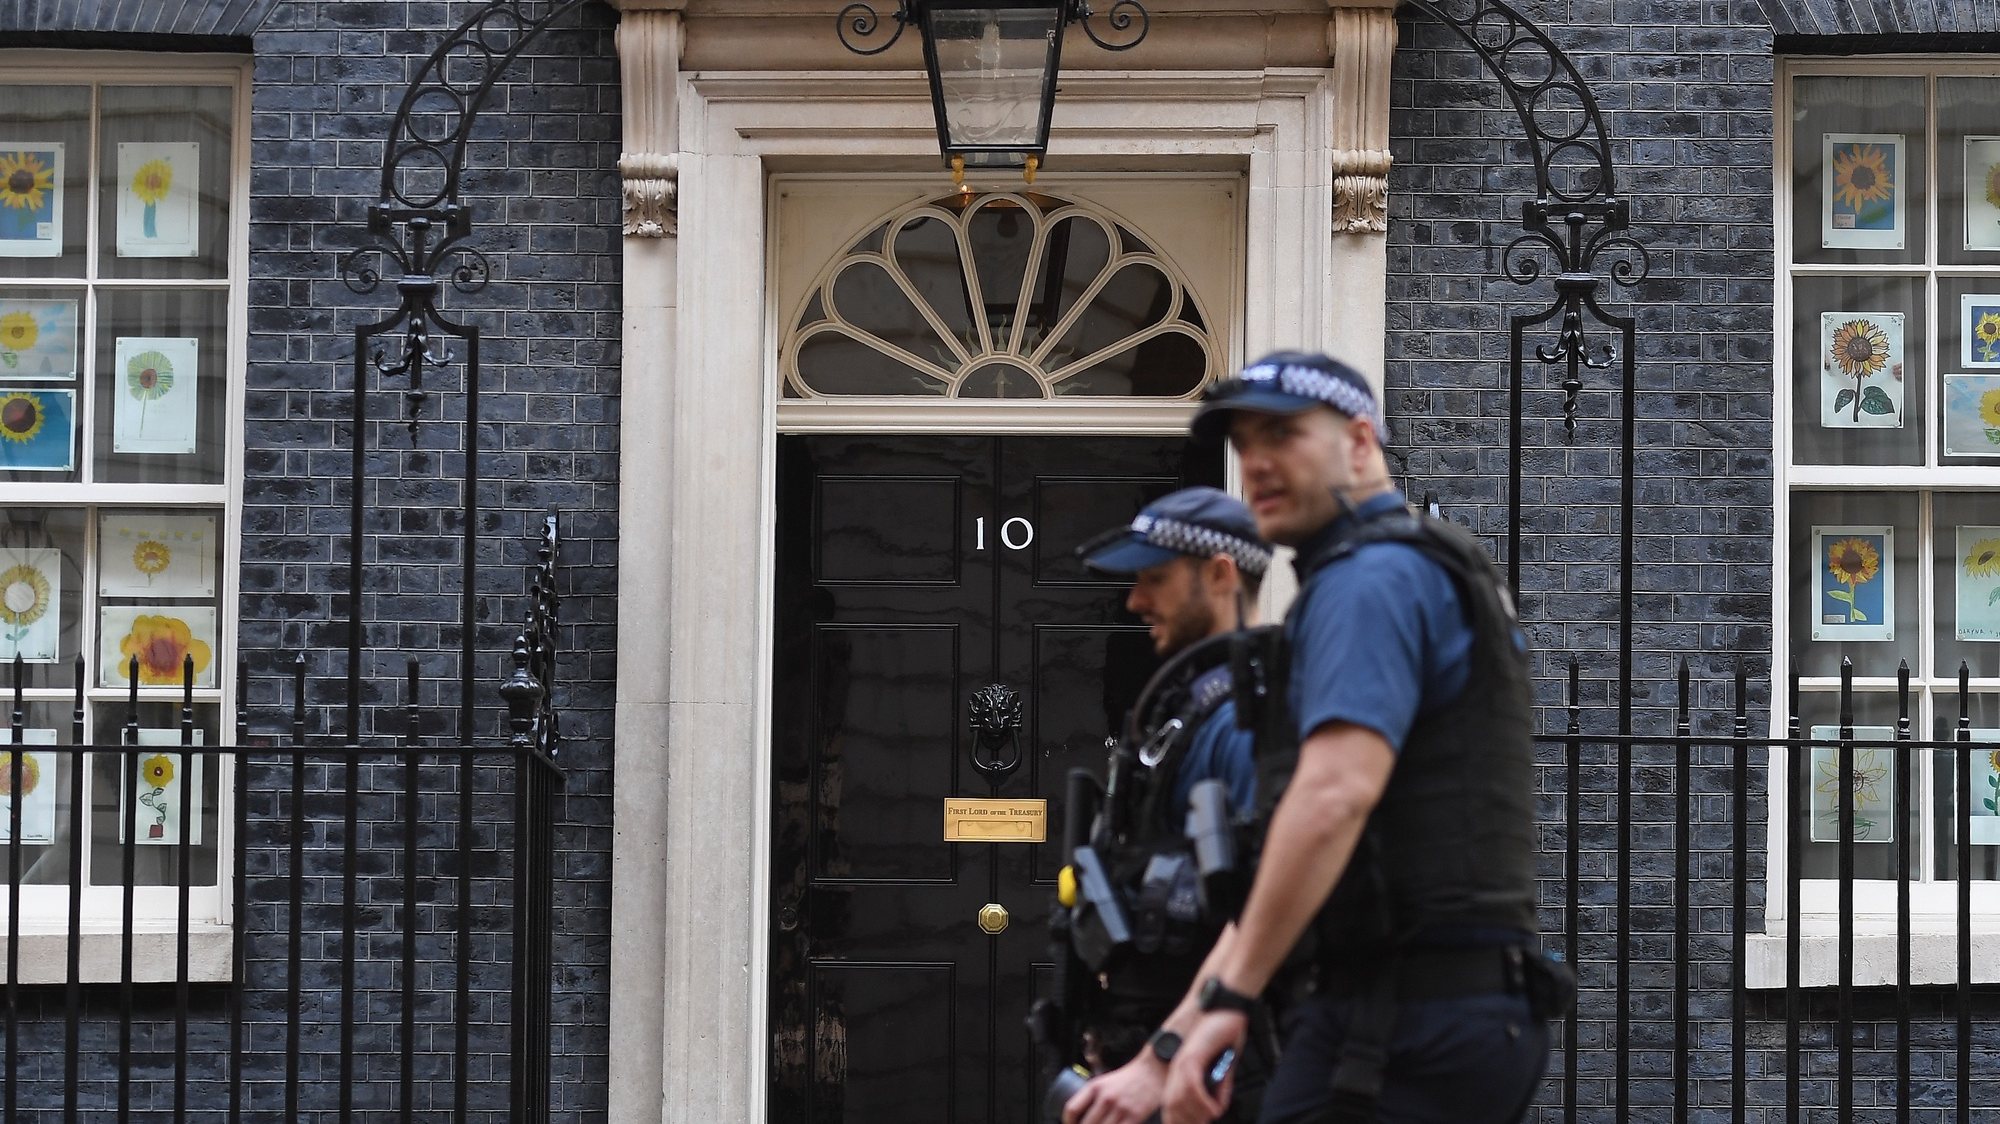 epa09900574 Downing Street in London, Britain, 21 April 2022. British Members of Parliament (MPs) are set to vote on whether to open an investigation over claims British Prime Minister Boris Johnson misled parliament. Johnson is under continued pressure over allegations he broke lockdown regulations by holding parties at Downing Street. He has subsequently been fined by the Met Police for breaching the rules.  EPA/ANDY RAIN